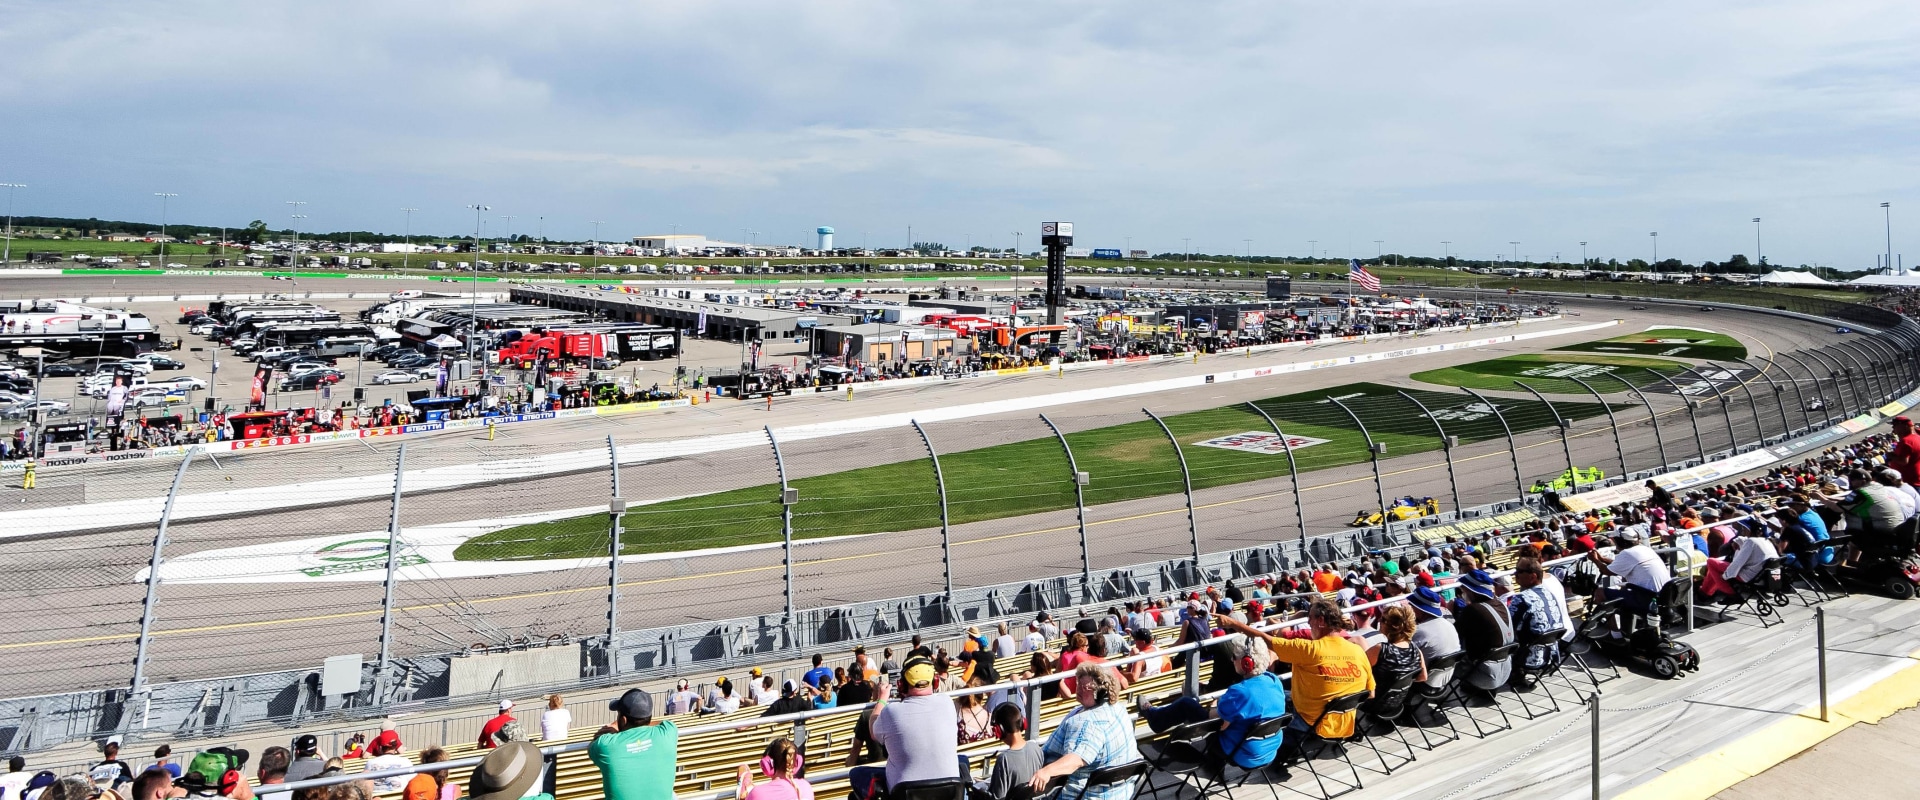 Safety Protocols for Racing Events